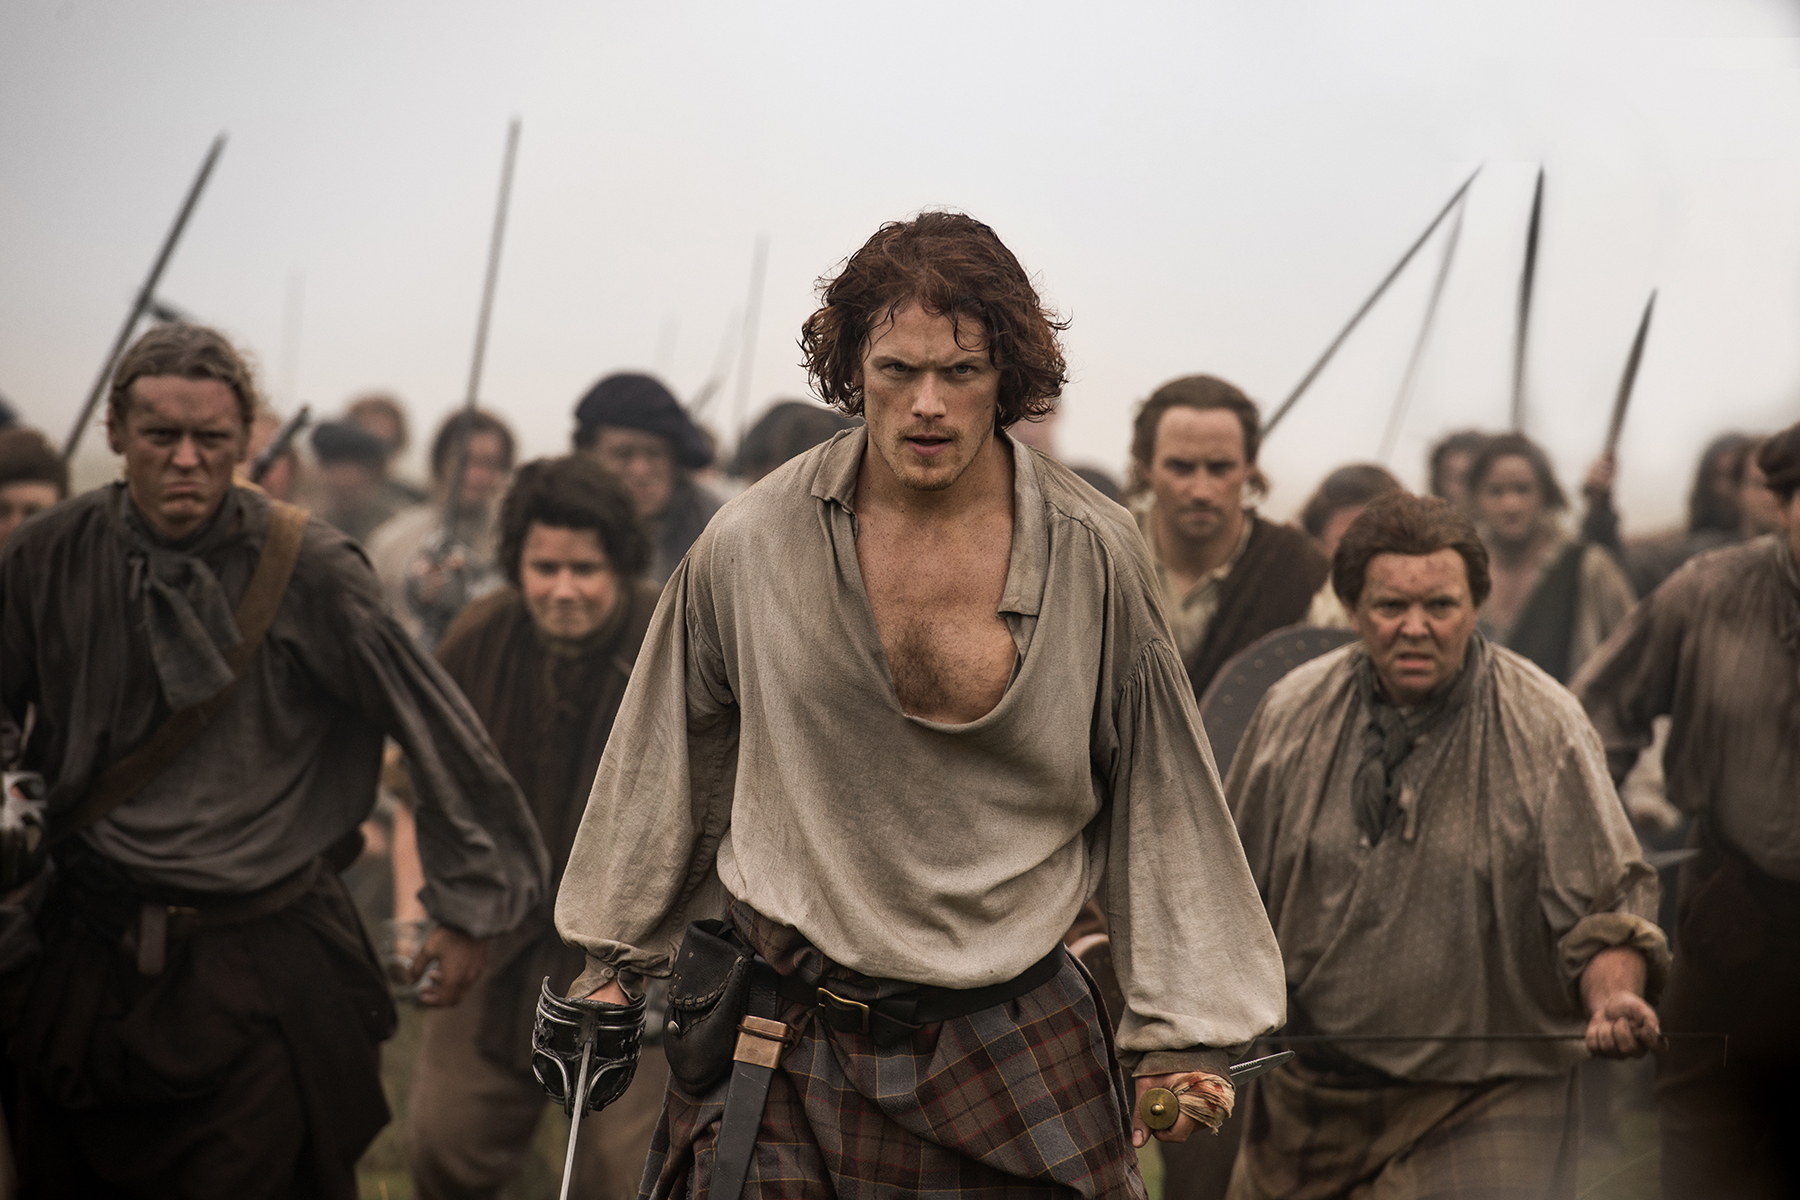 Outlander on Starz: Cancelled or Season 4? (Release Date) - canceled - How Many Seasons Of Outlander Are On Starz